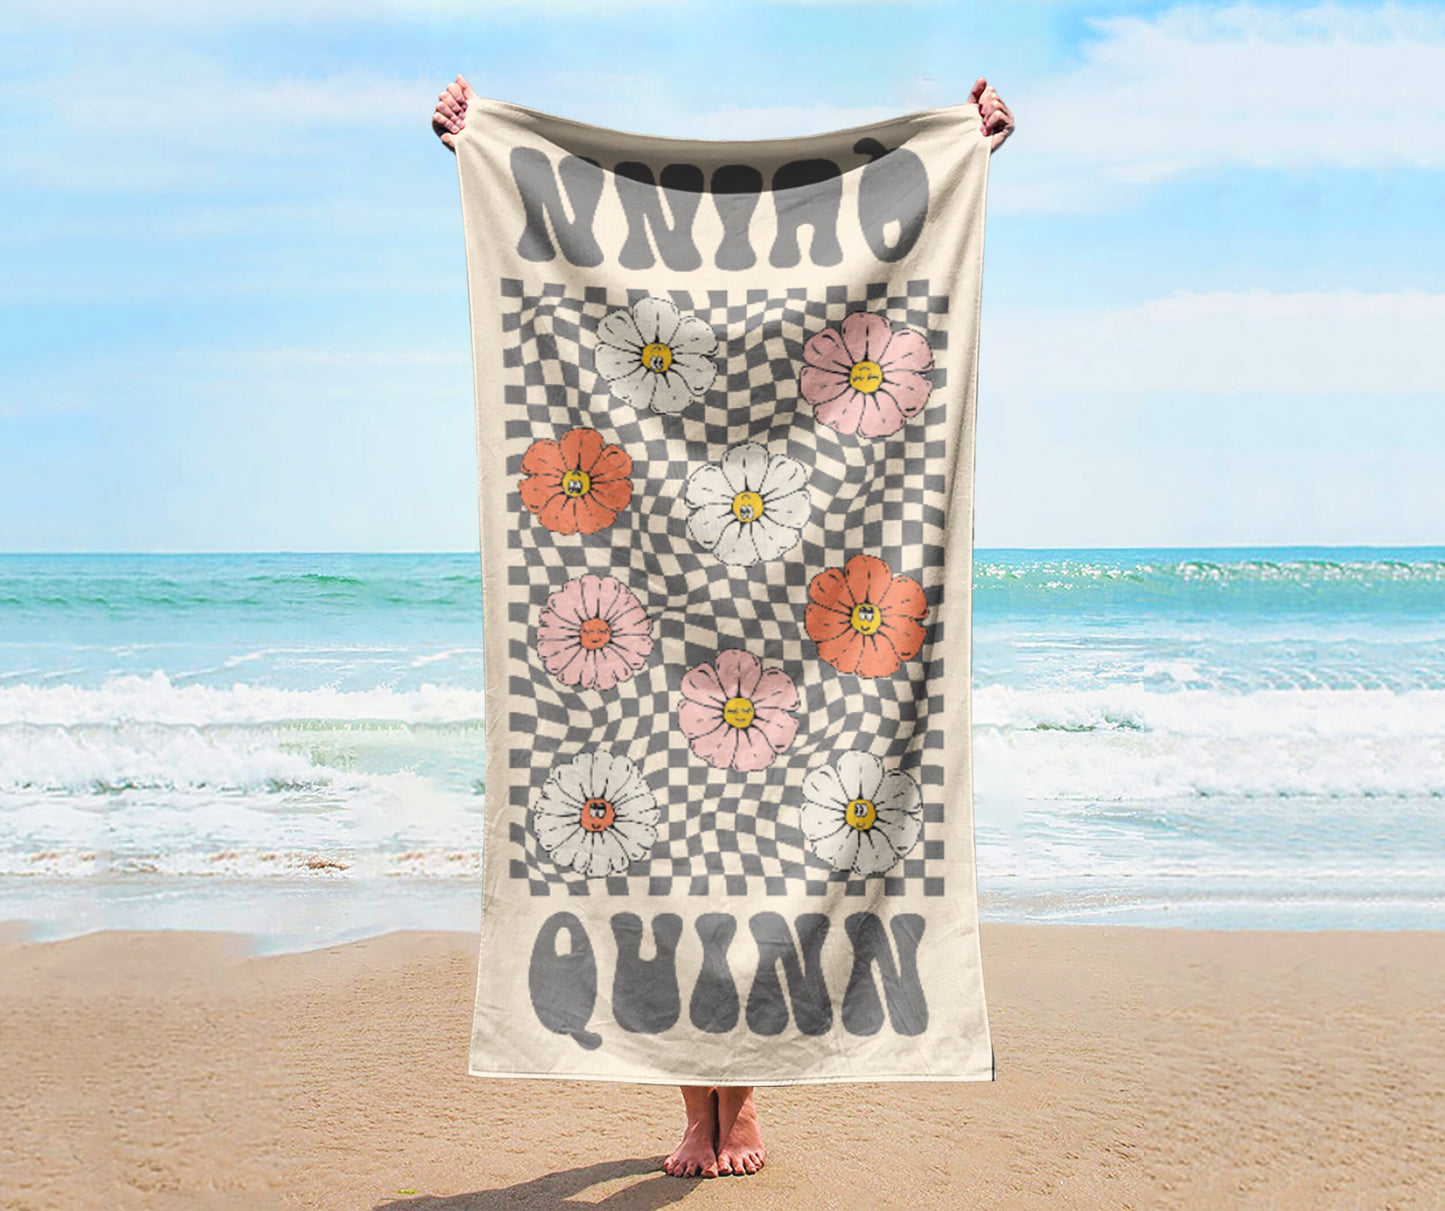 RETRO Multi Style Personalized Beach Towel Name Bath Towel Custom Pool Towel Beach Towel With Name Outside Birthday Vacation Gift